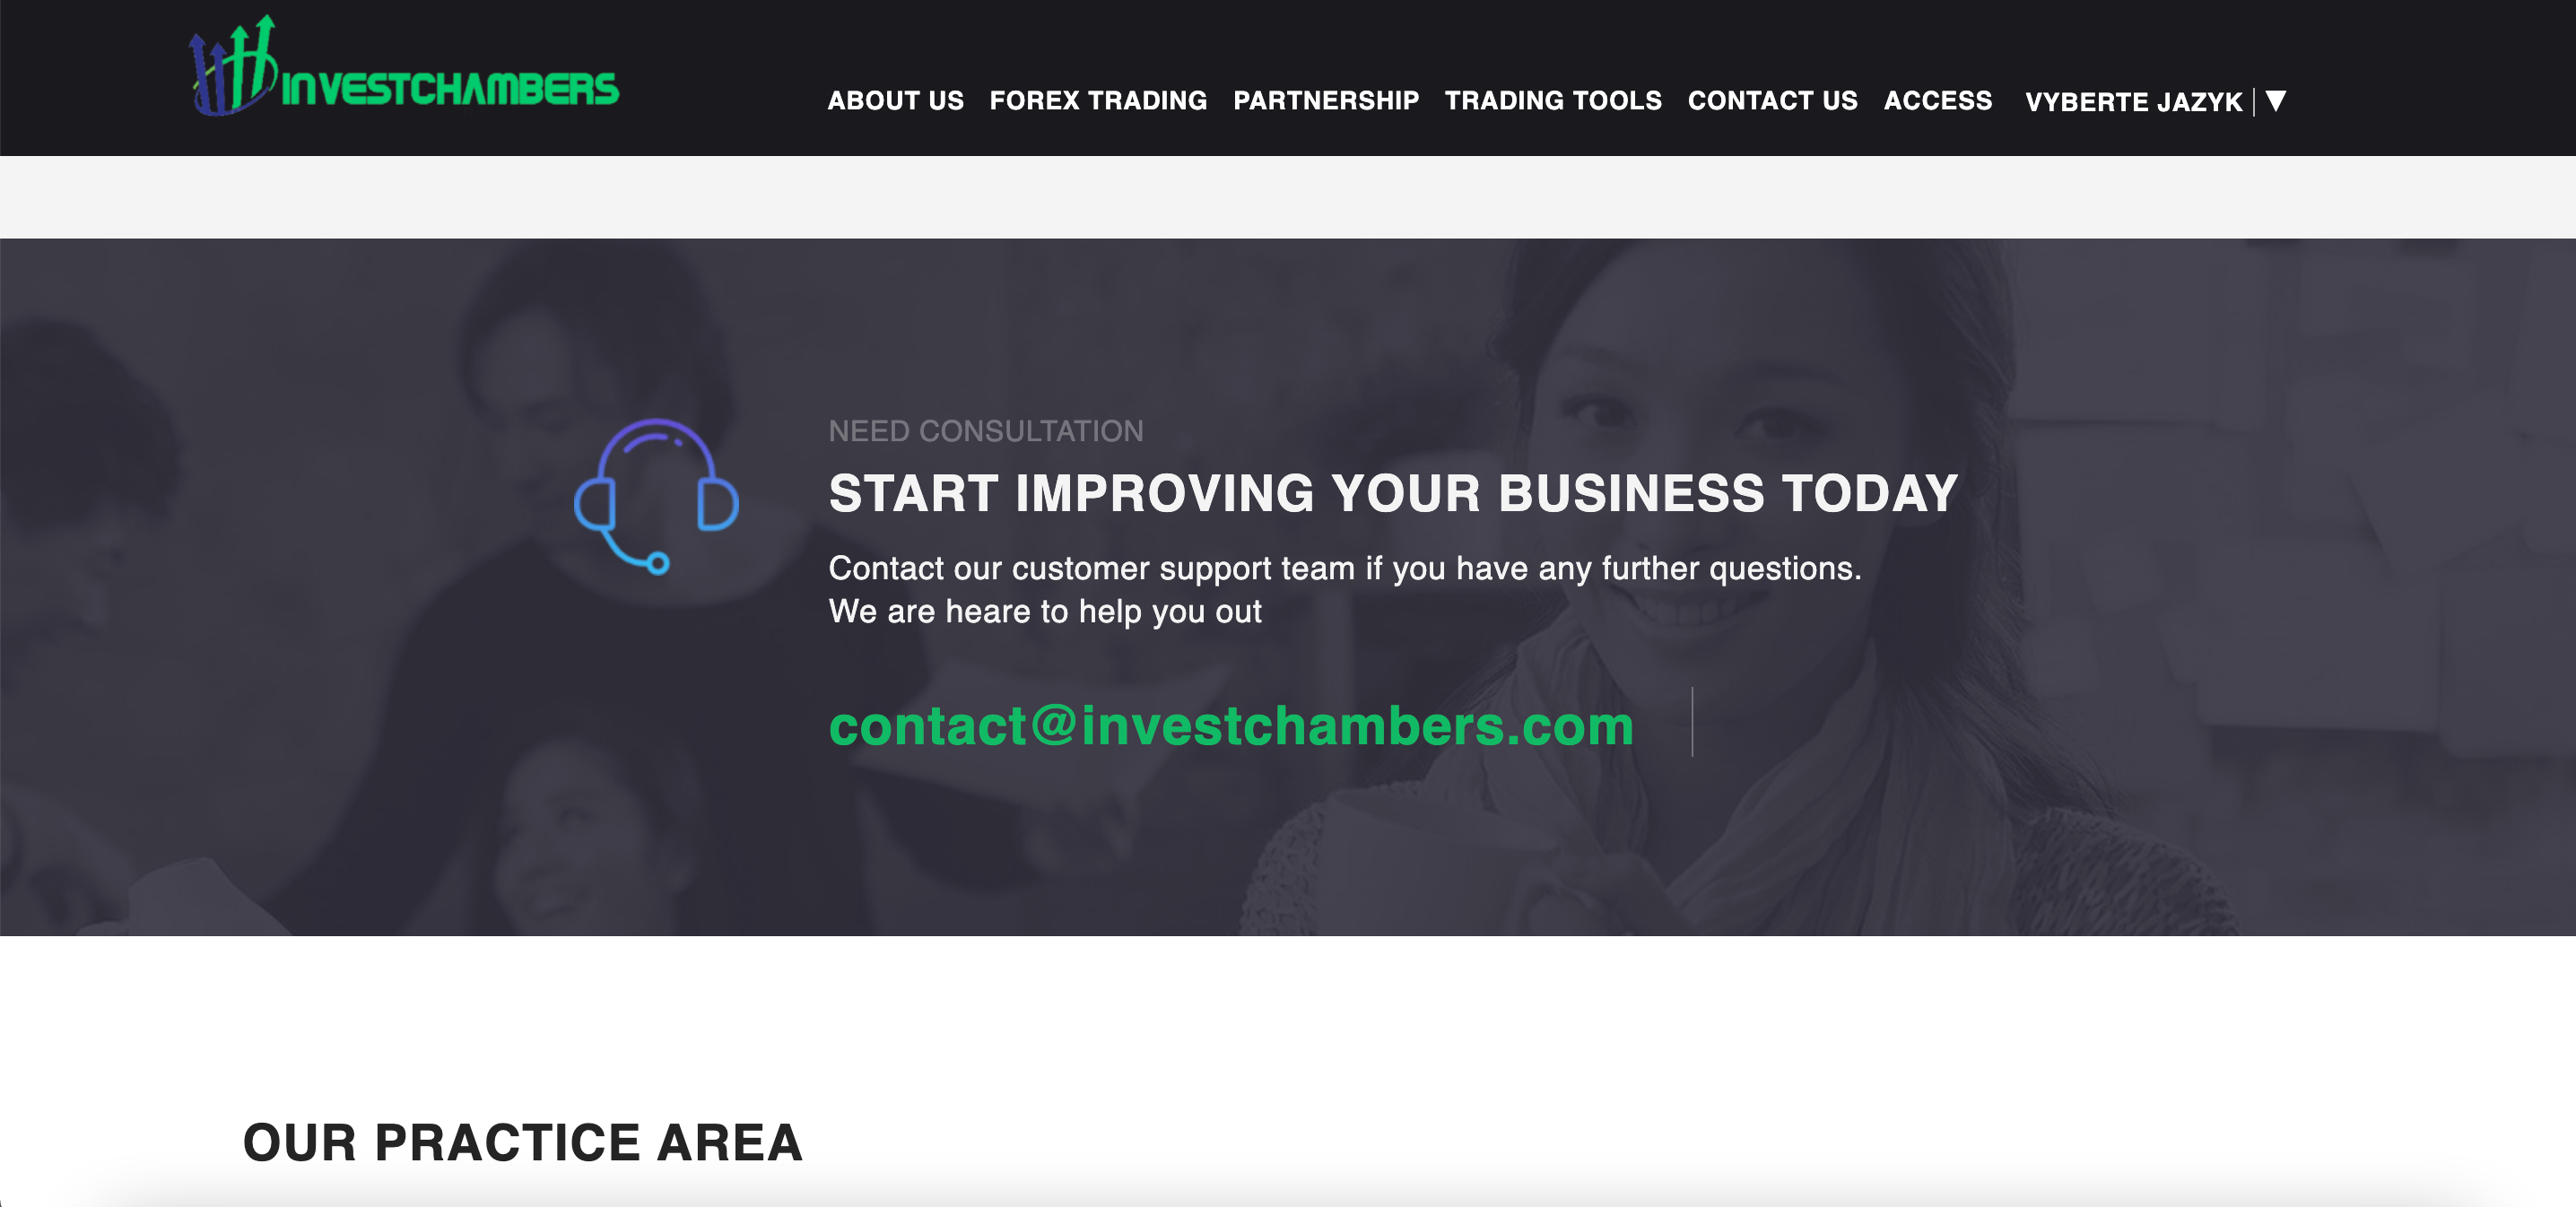 Invest Chambers website